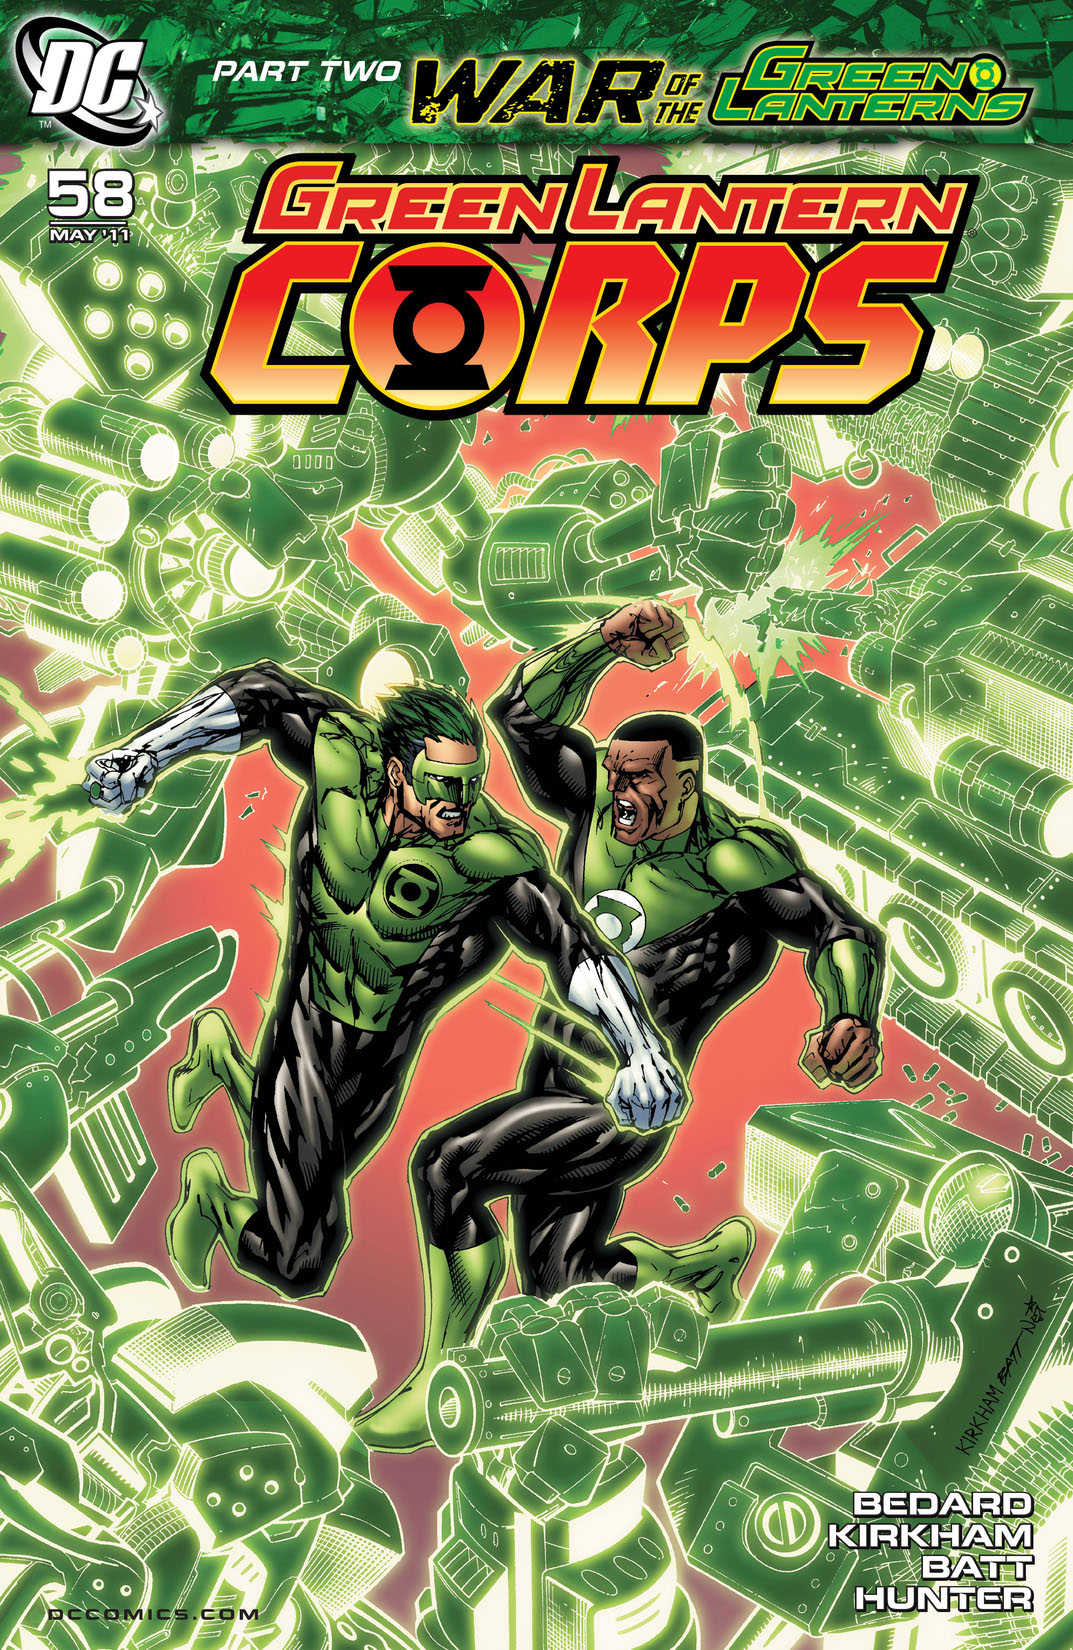 Green Lantern Corps (2006-) #58 preview images